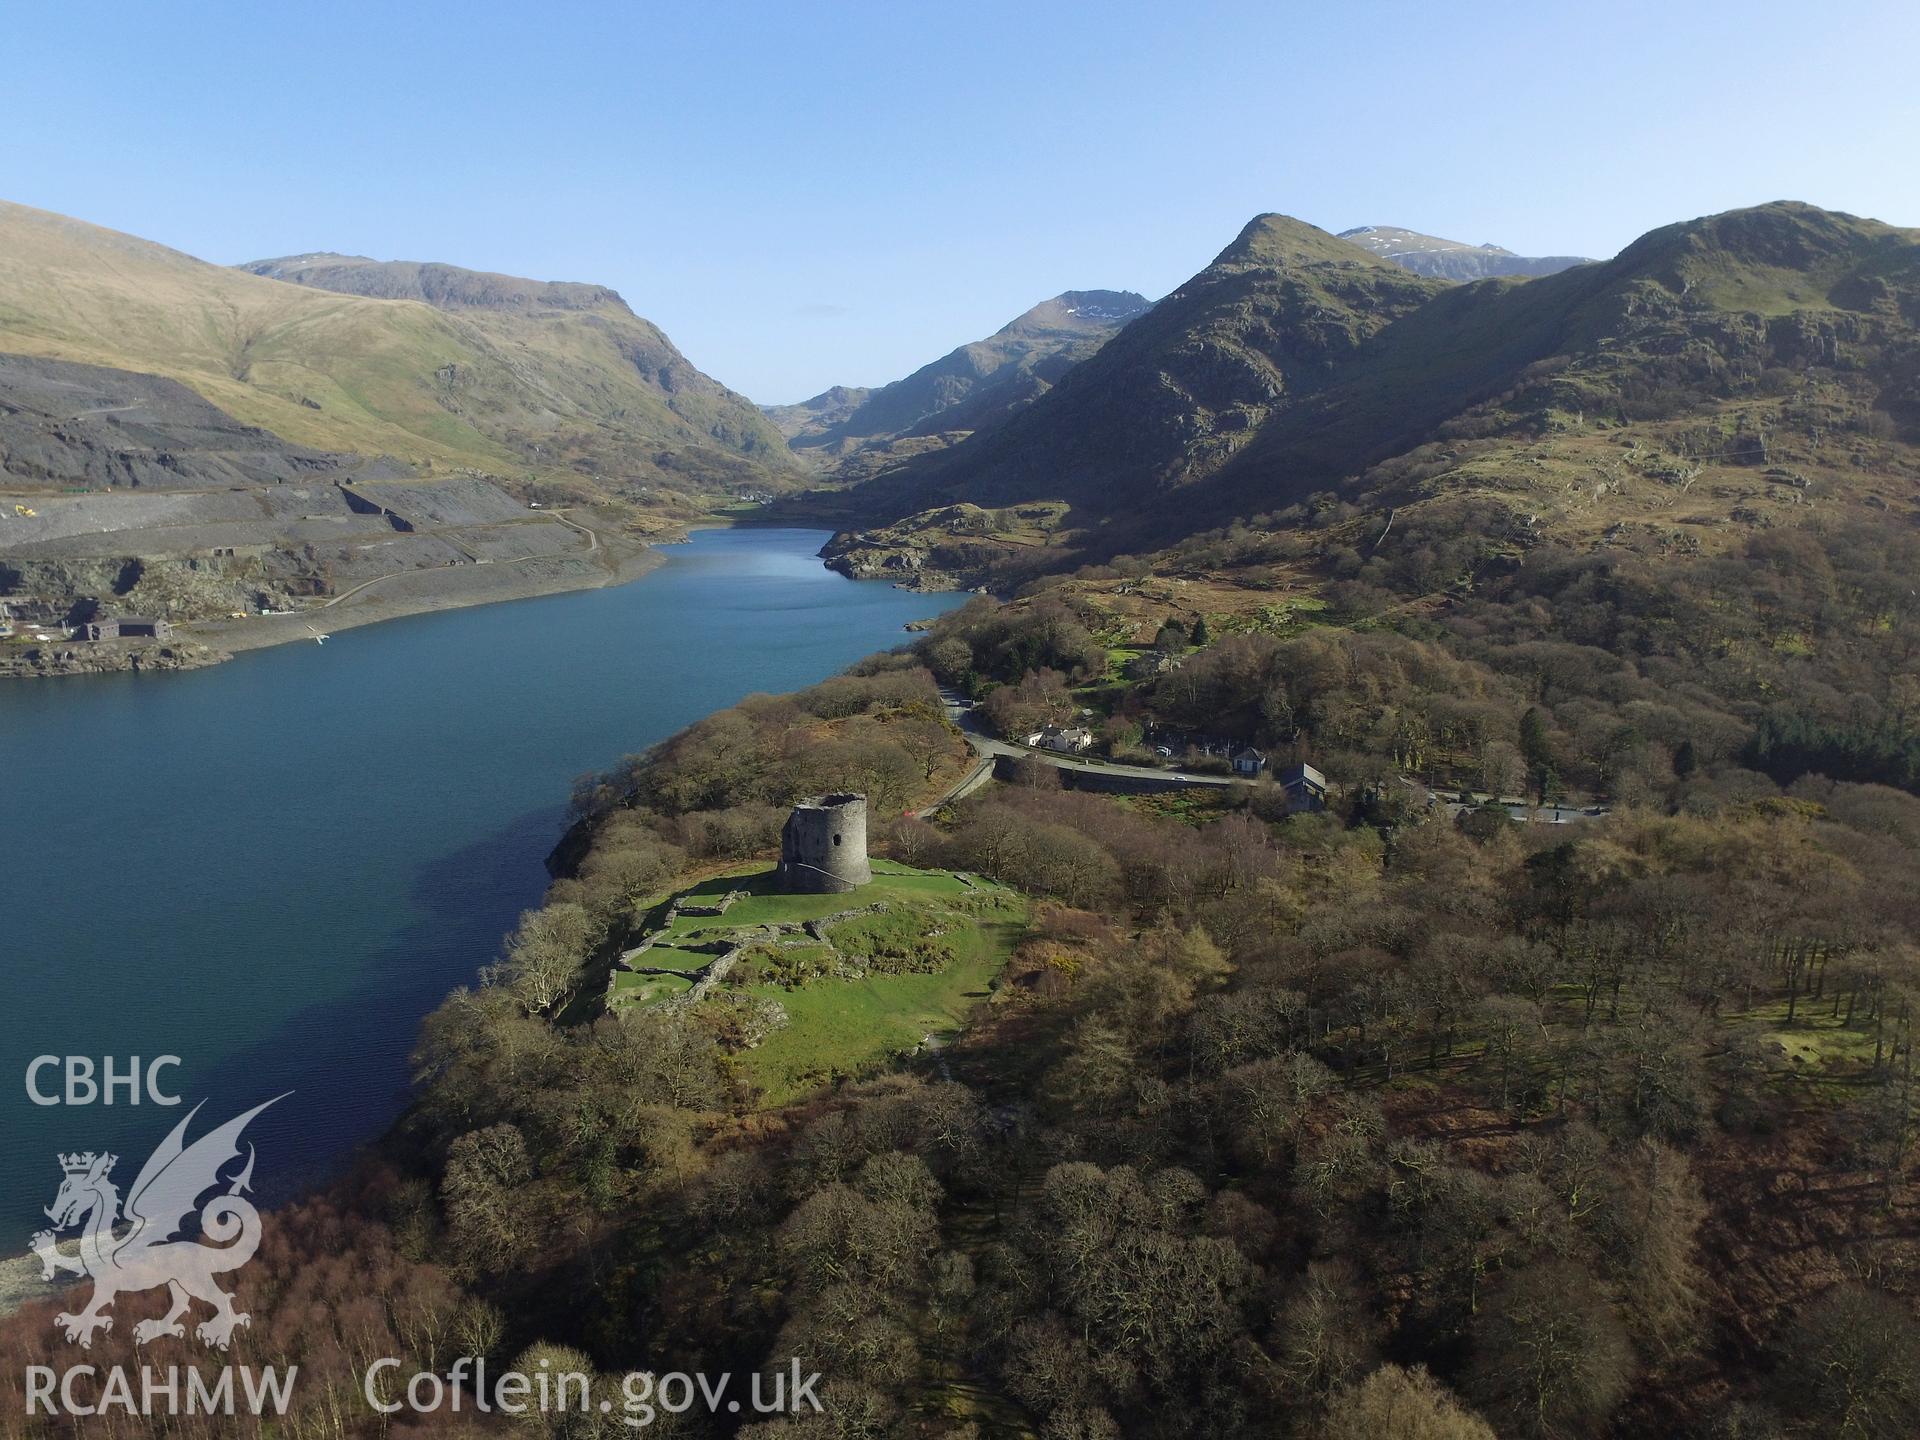 Colour photo showing Dolbadarn Castle, produced by Paul R. Davis, 15th March 2017.